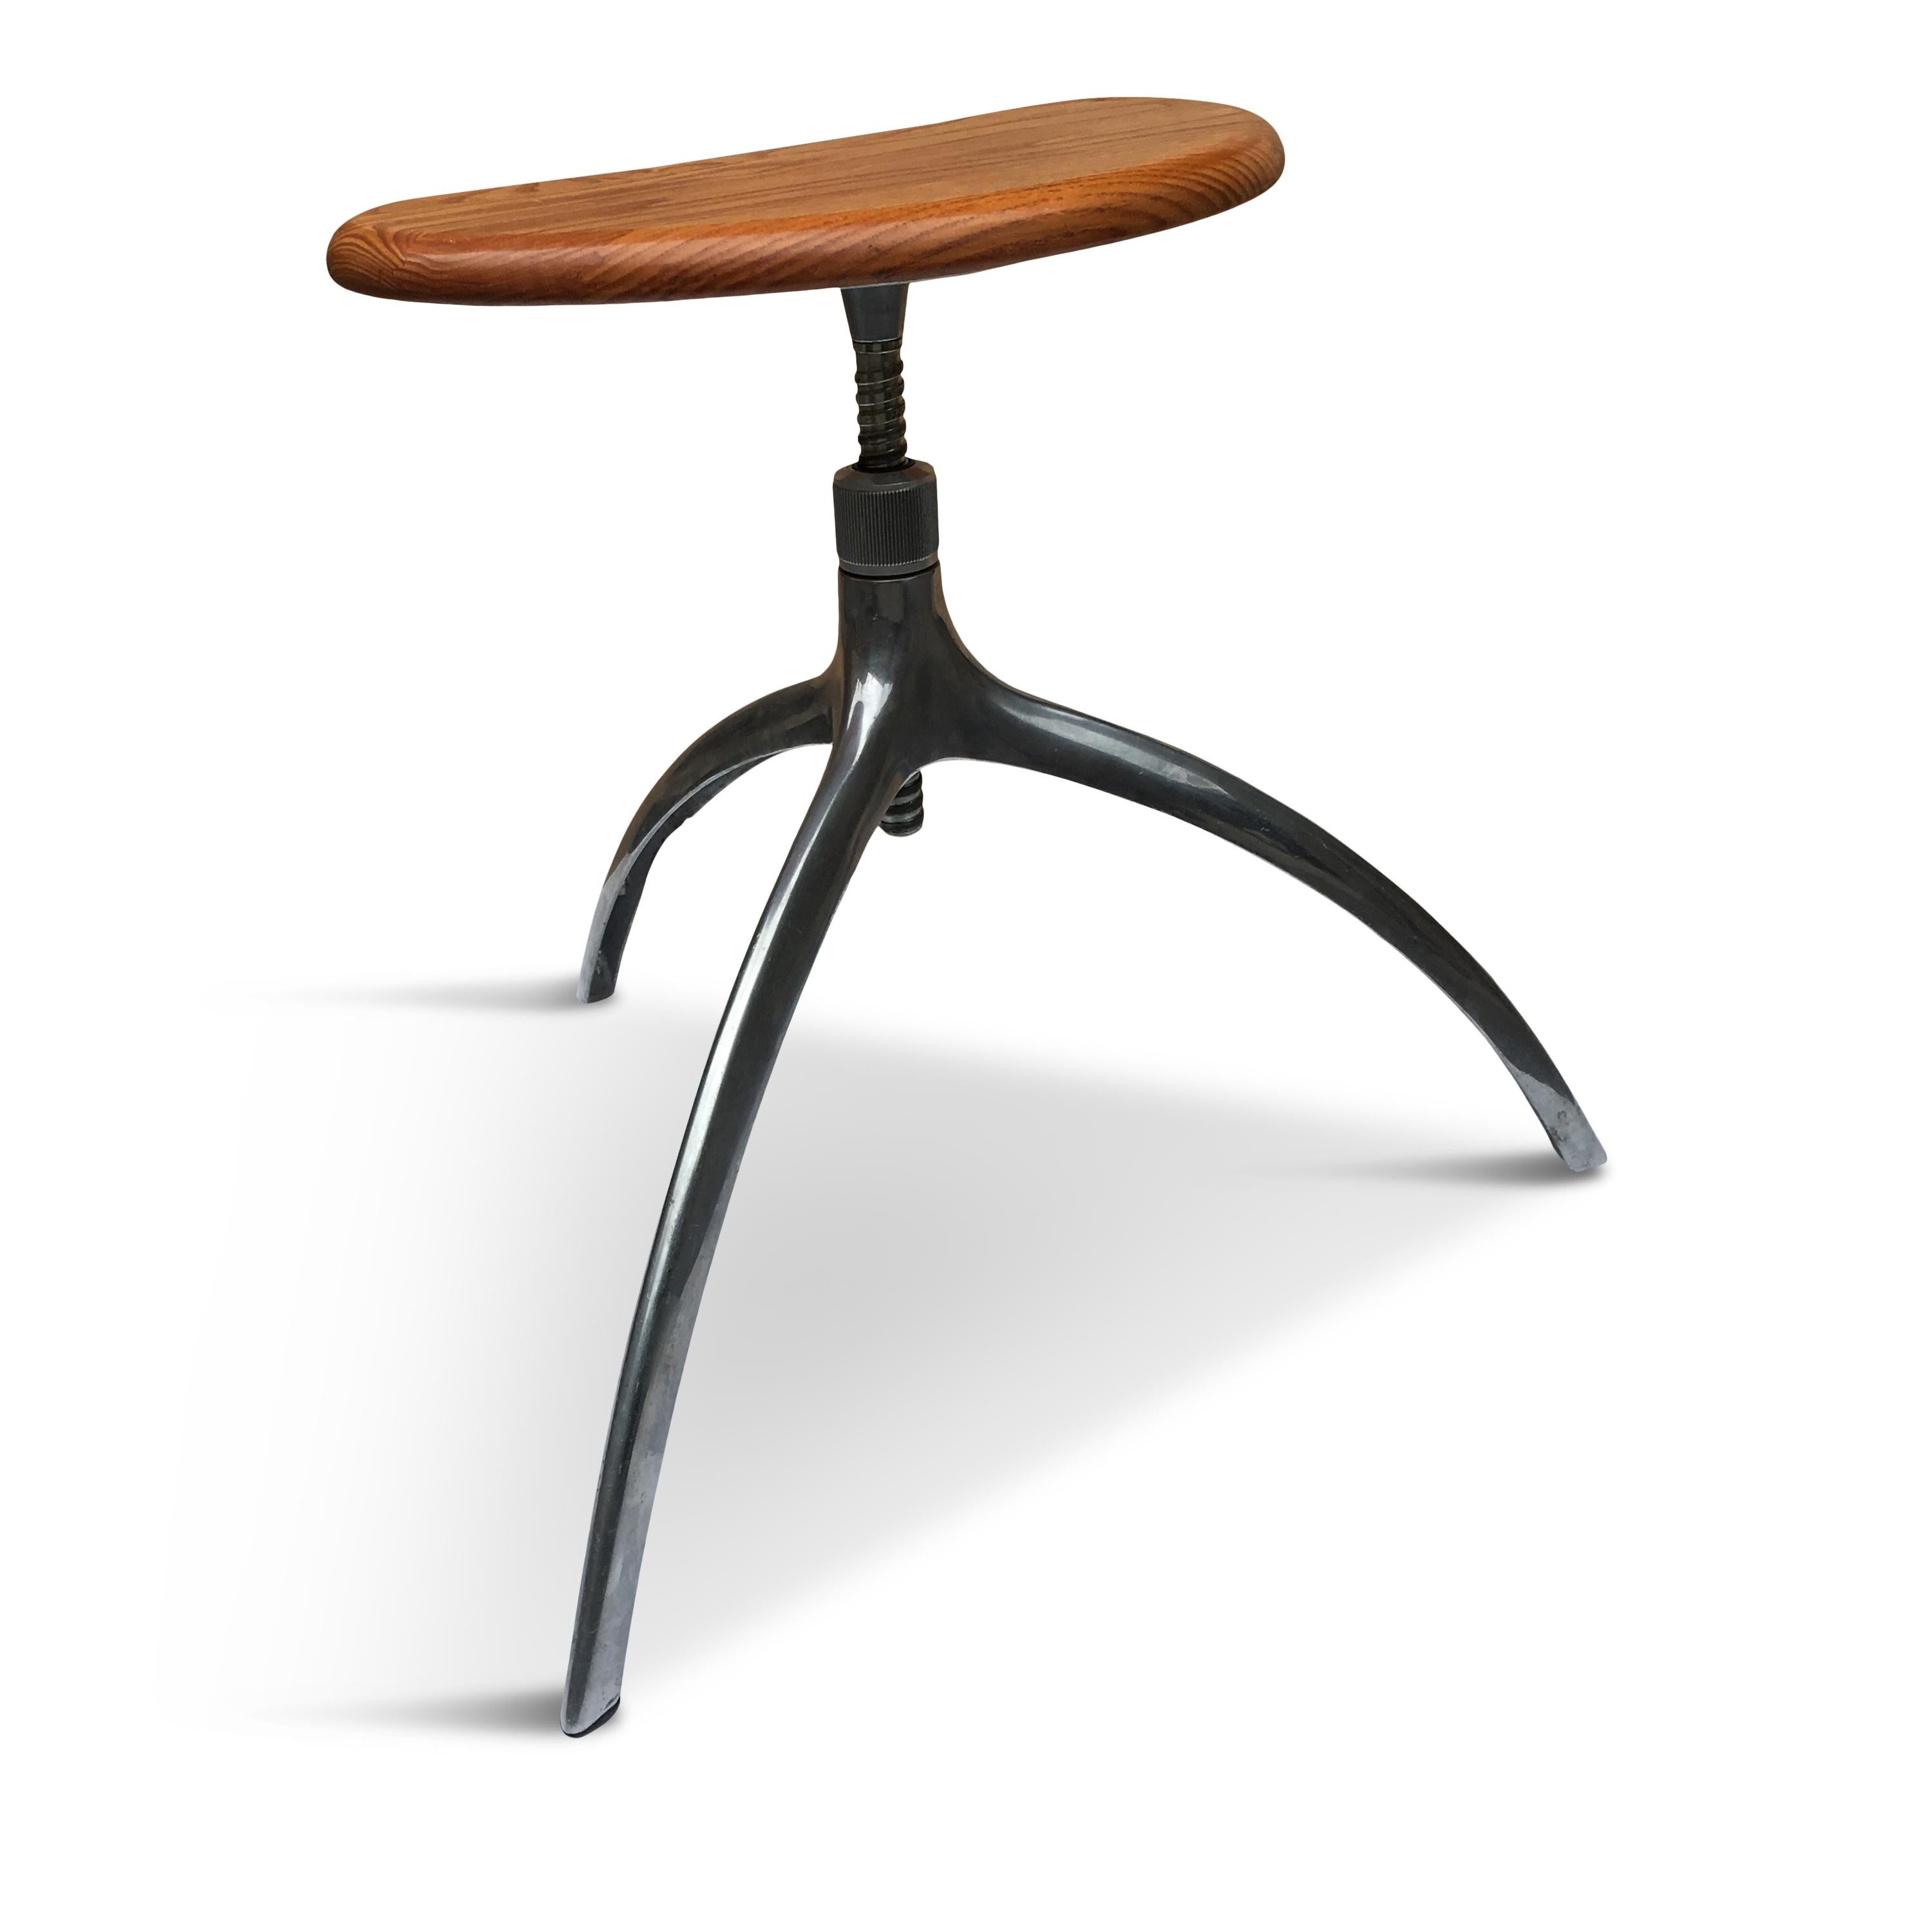 Solid cherrywood tabletop, rotary die-casting aluminium height-adjustable tripod. Can be used as a stool. Design by Paolo Rizzatto, Italy, 1991. 

Seat - W 39 cm, D 23 cm
H 43/61 cm
D 51 cm.